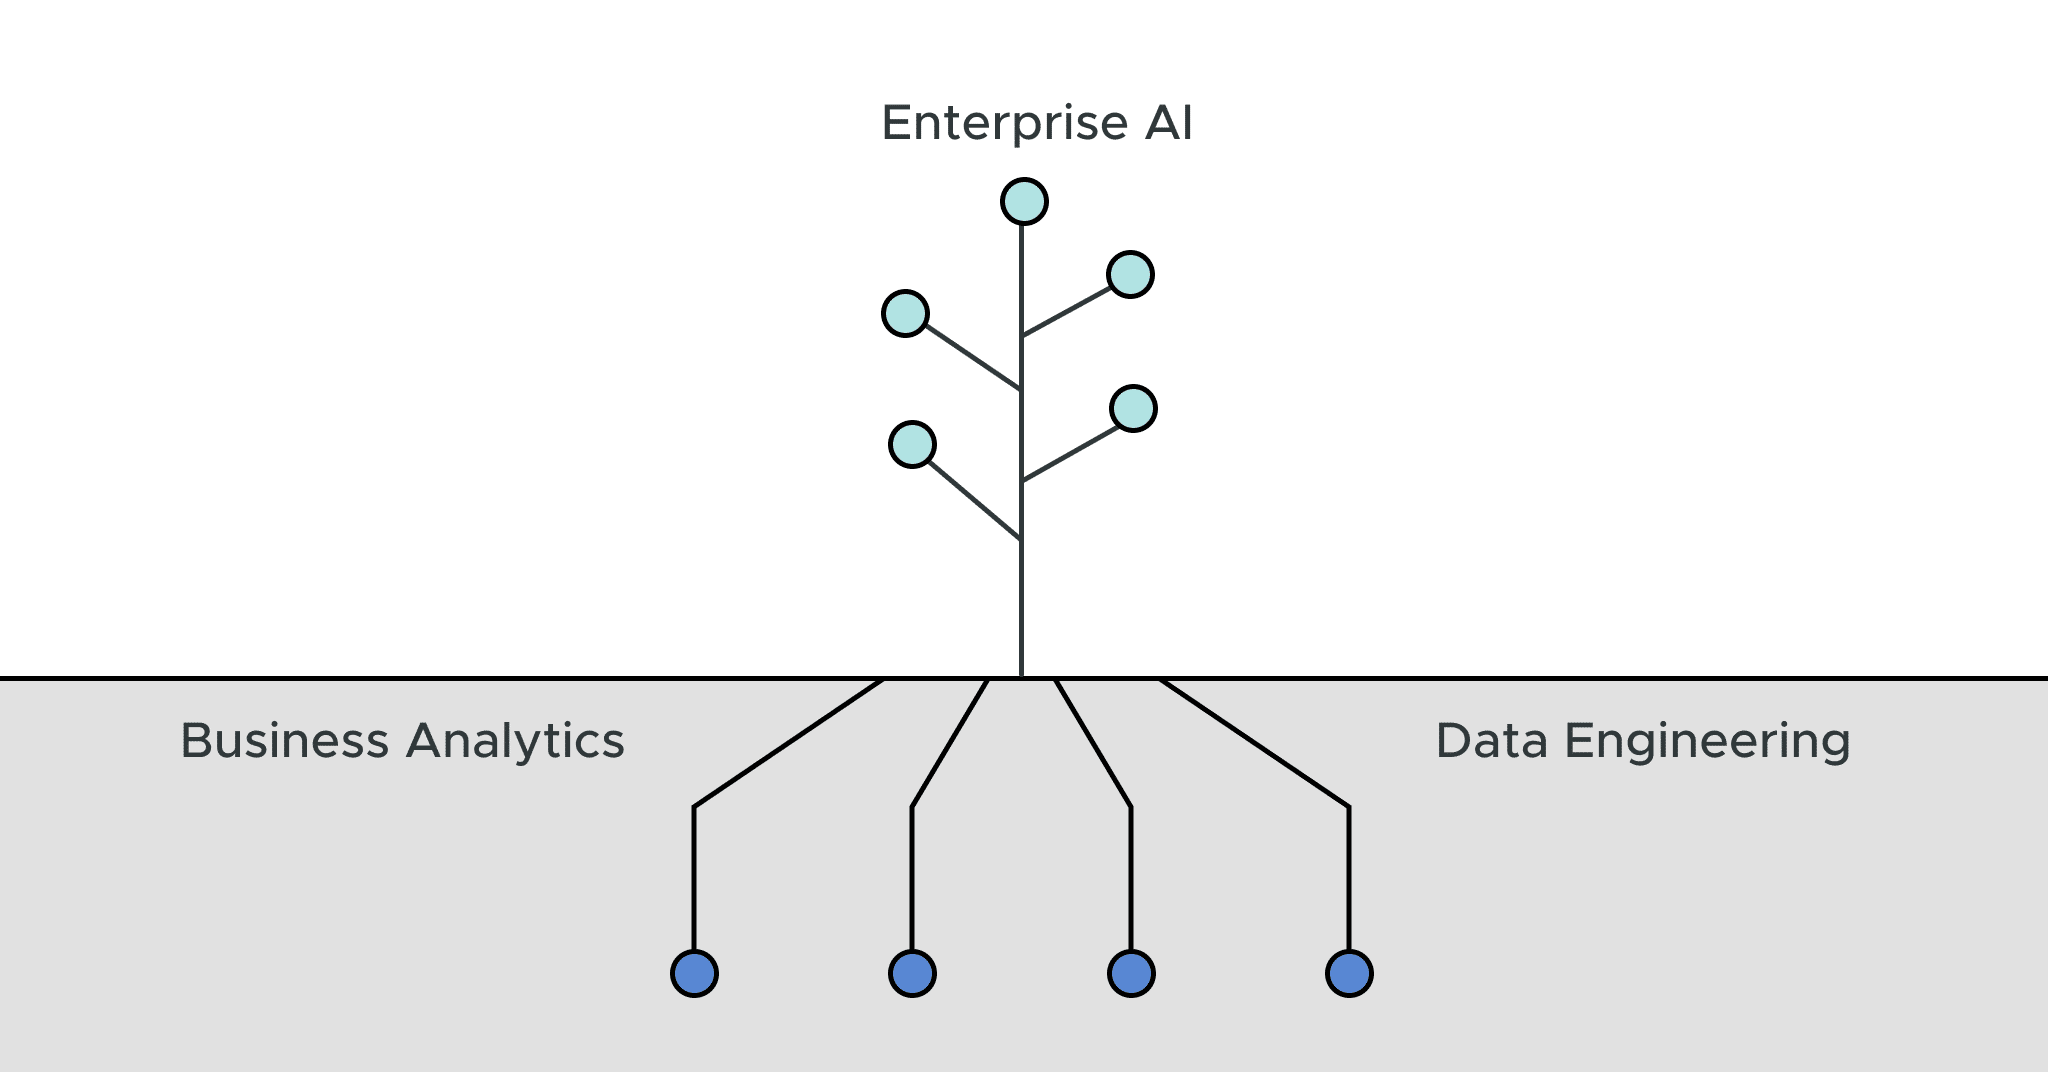 Creating an Enterprise AI Strategy with an Analytics Foundation